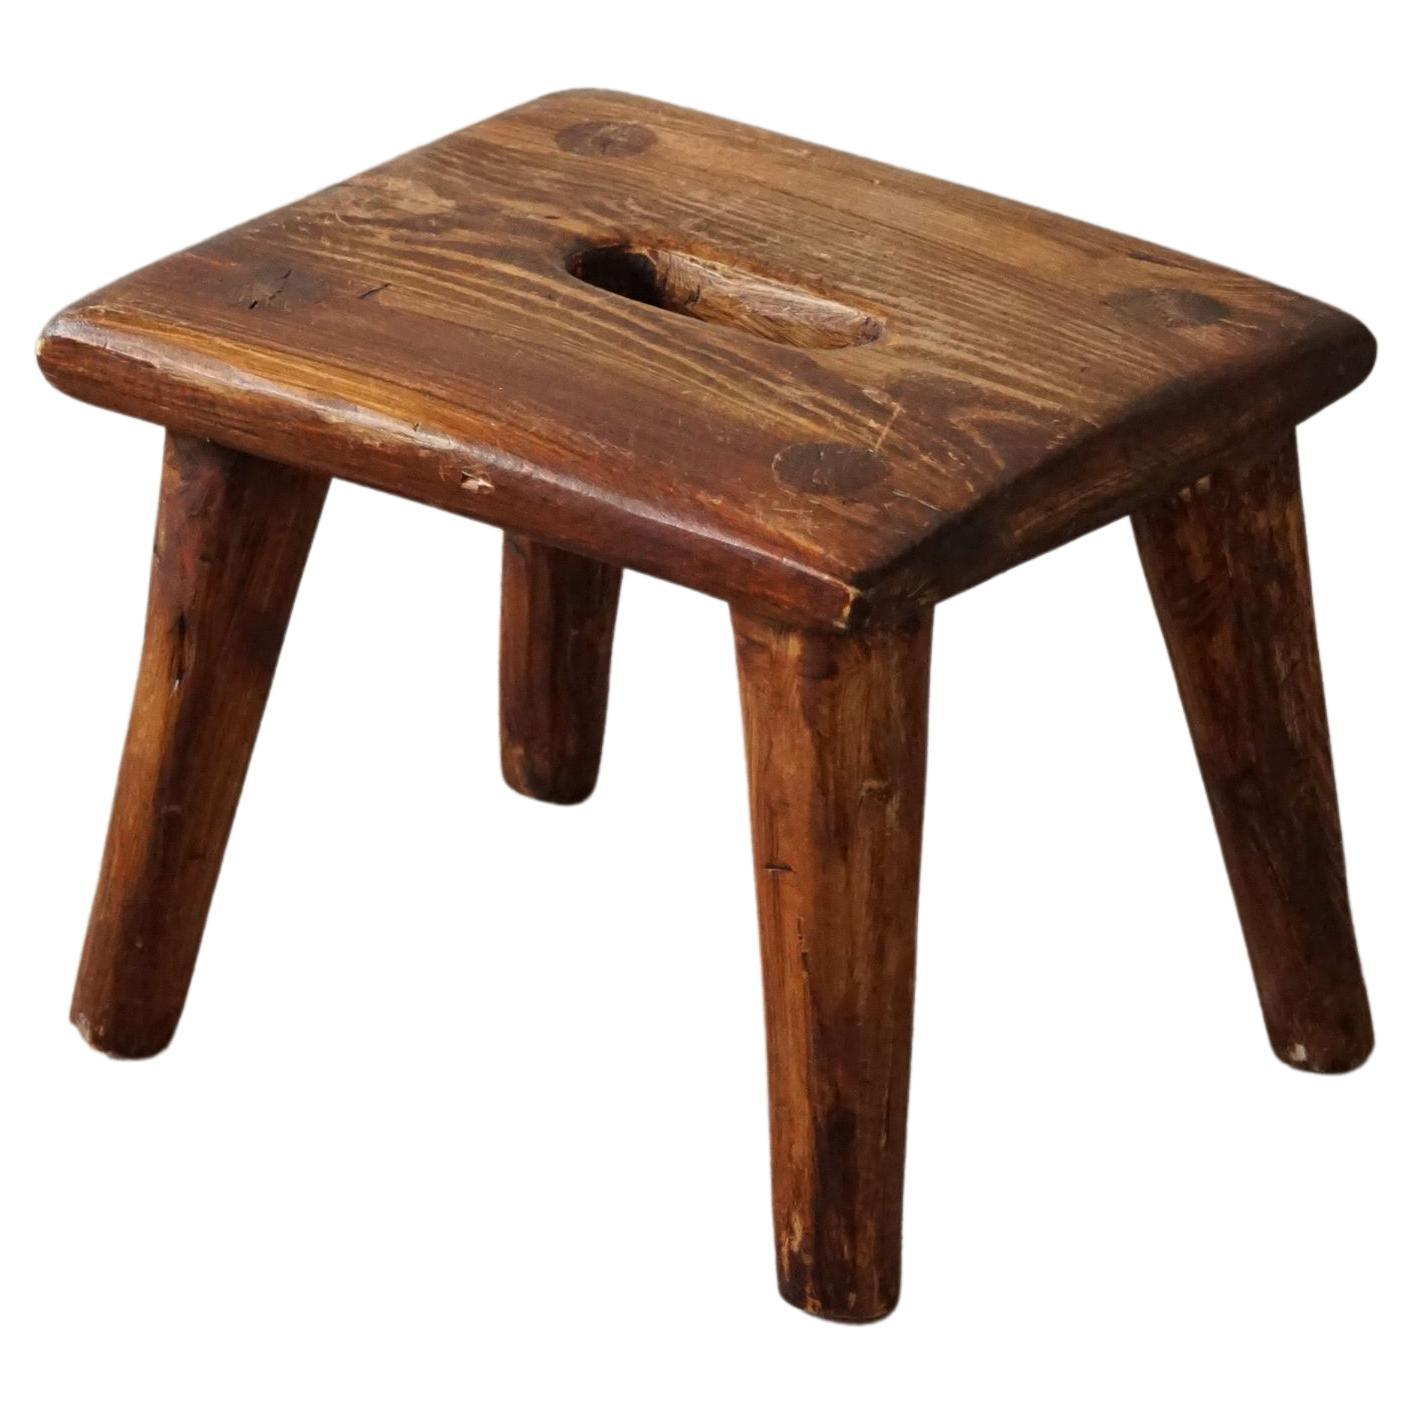 Wabi Sabi Stool in Solid Pine, Handcrafted by a Danish Cabinetmaker, 1960s For Sale